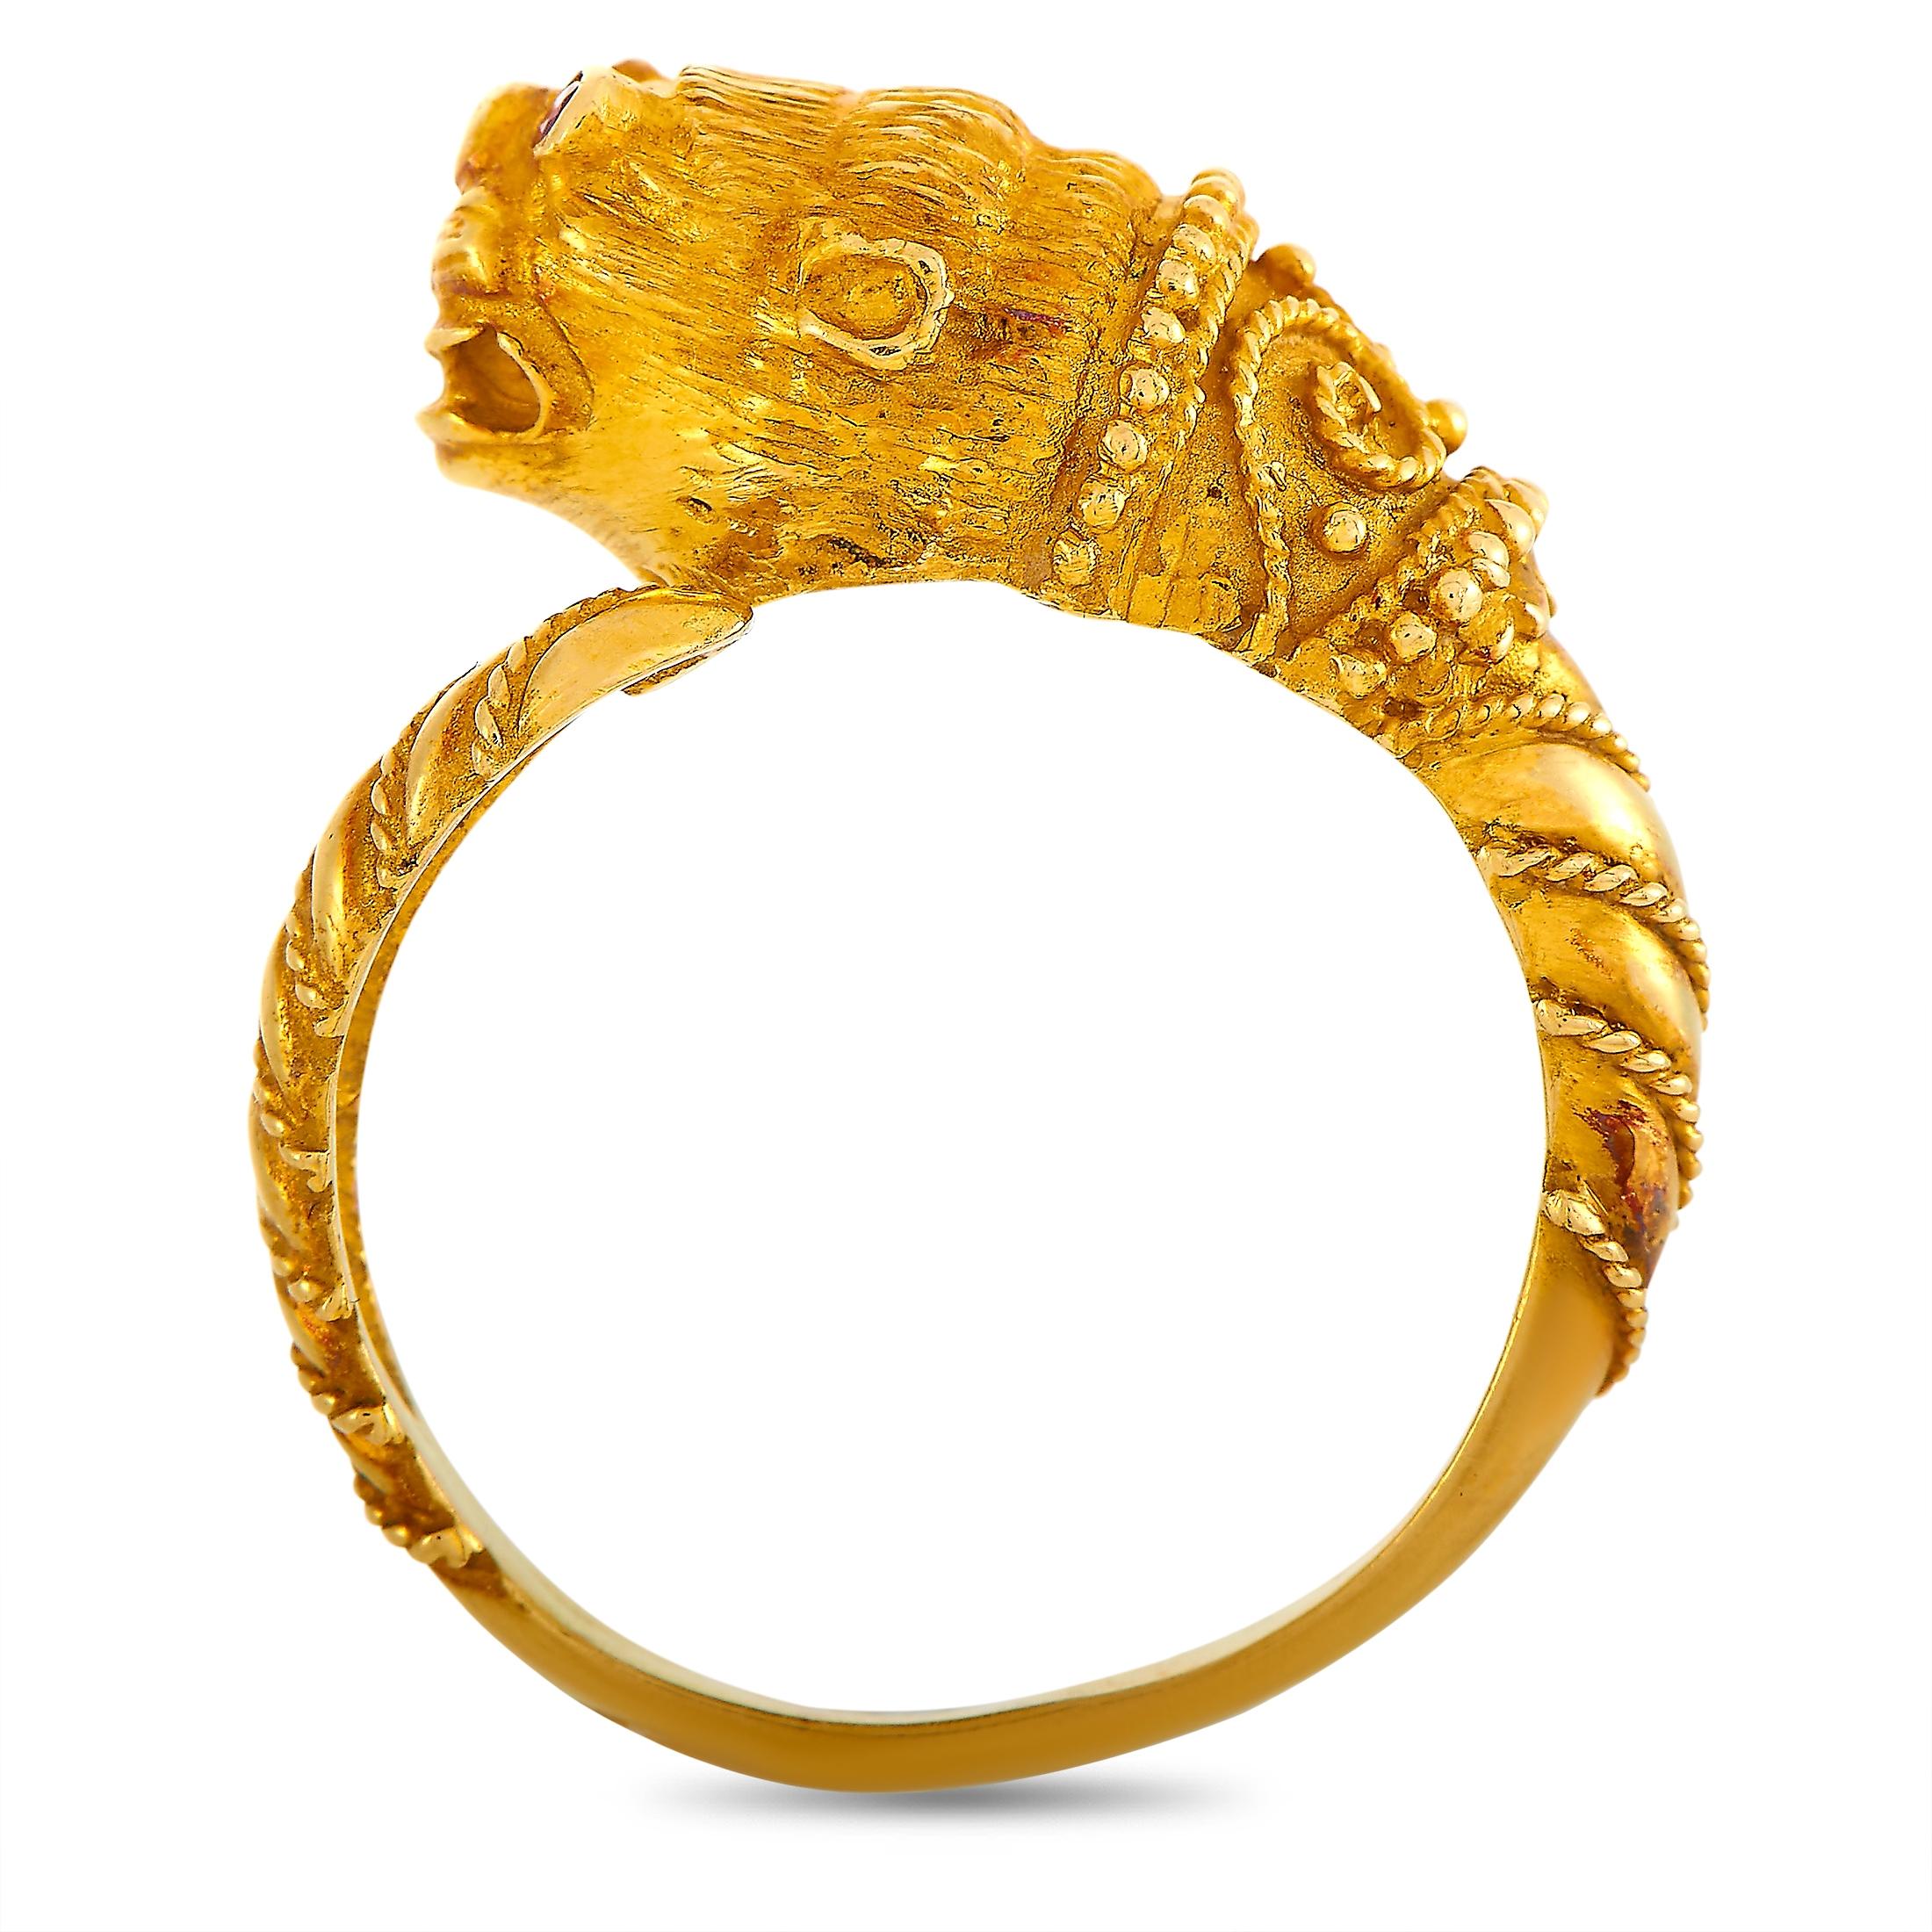 This Ilias Lalaounis ring with a lion head motif is crafted from 18K yellow gold and weighs 8.1 grams. It boasts band thickness of 3 mm and top height of 8 mm, while top dimensions measure 10 by 20 mm.
 
 The ring is offered in estate condition